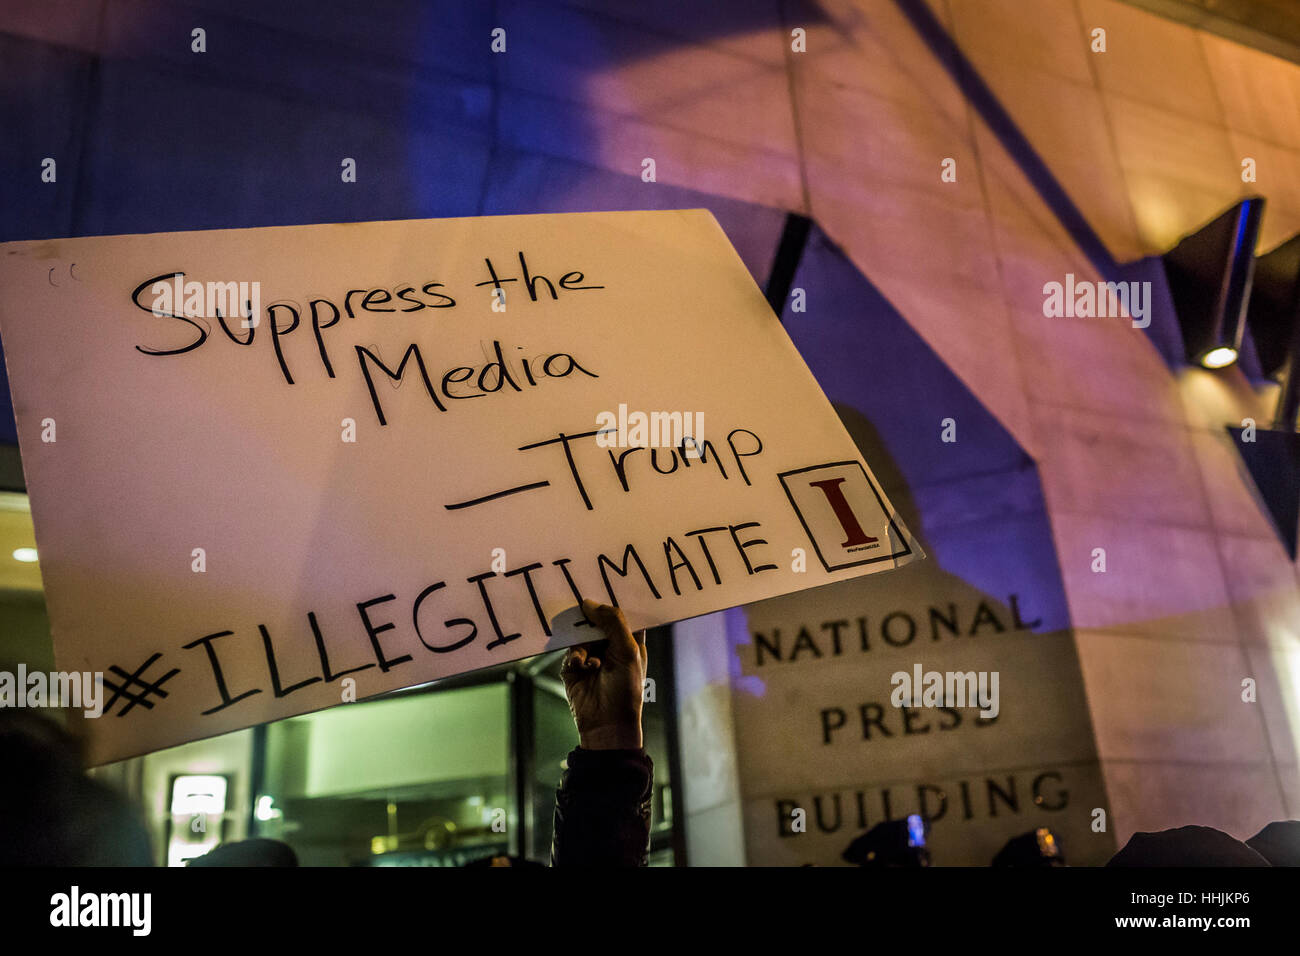 Washington Dc, United States. 19th Jan, 2017. On the eve before Donald Trump is sworn in as the 45th President of the United States, in a pre-inauguration protest on January 19, 2017, hundreds of activists surrounded the Alt-Right 'Deploraball,' which was taking place inside the National Press Club in Washington, DC Credit: Michael Nigro/Pacific Press/Alamy Live News Stock Photo